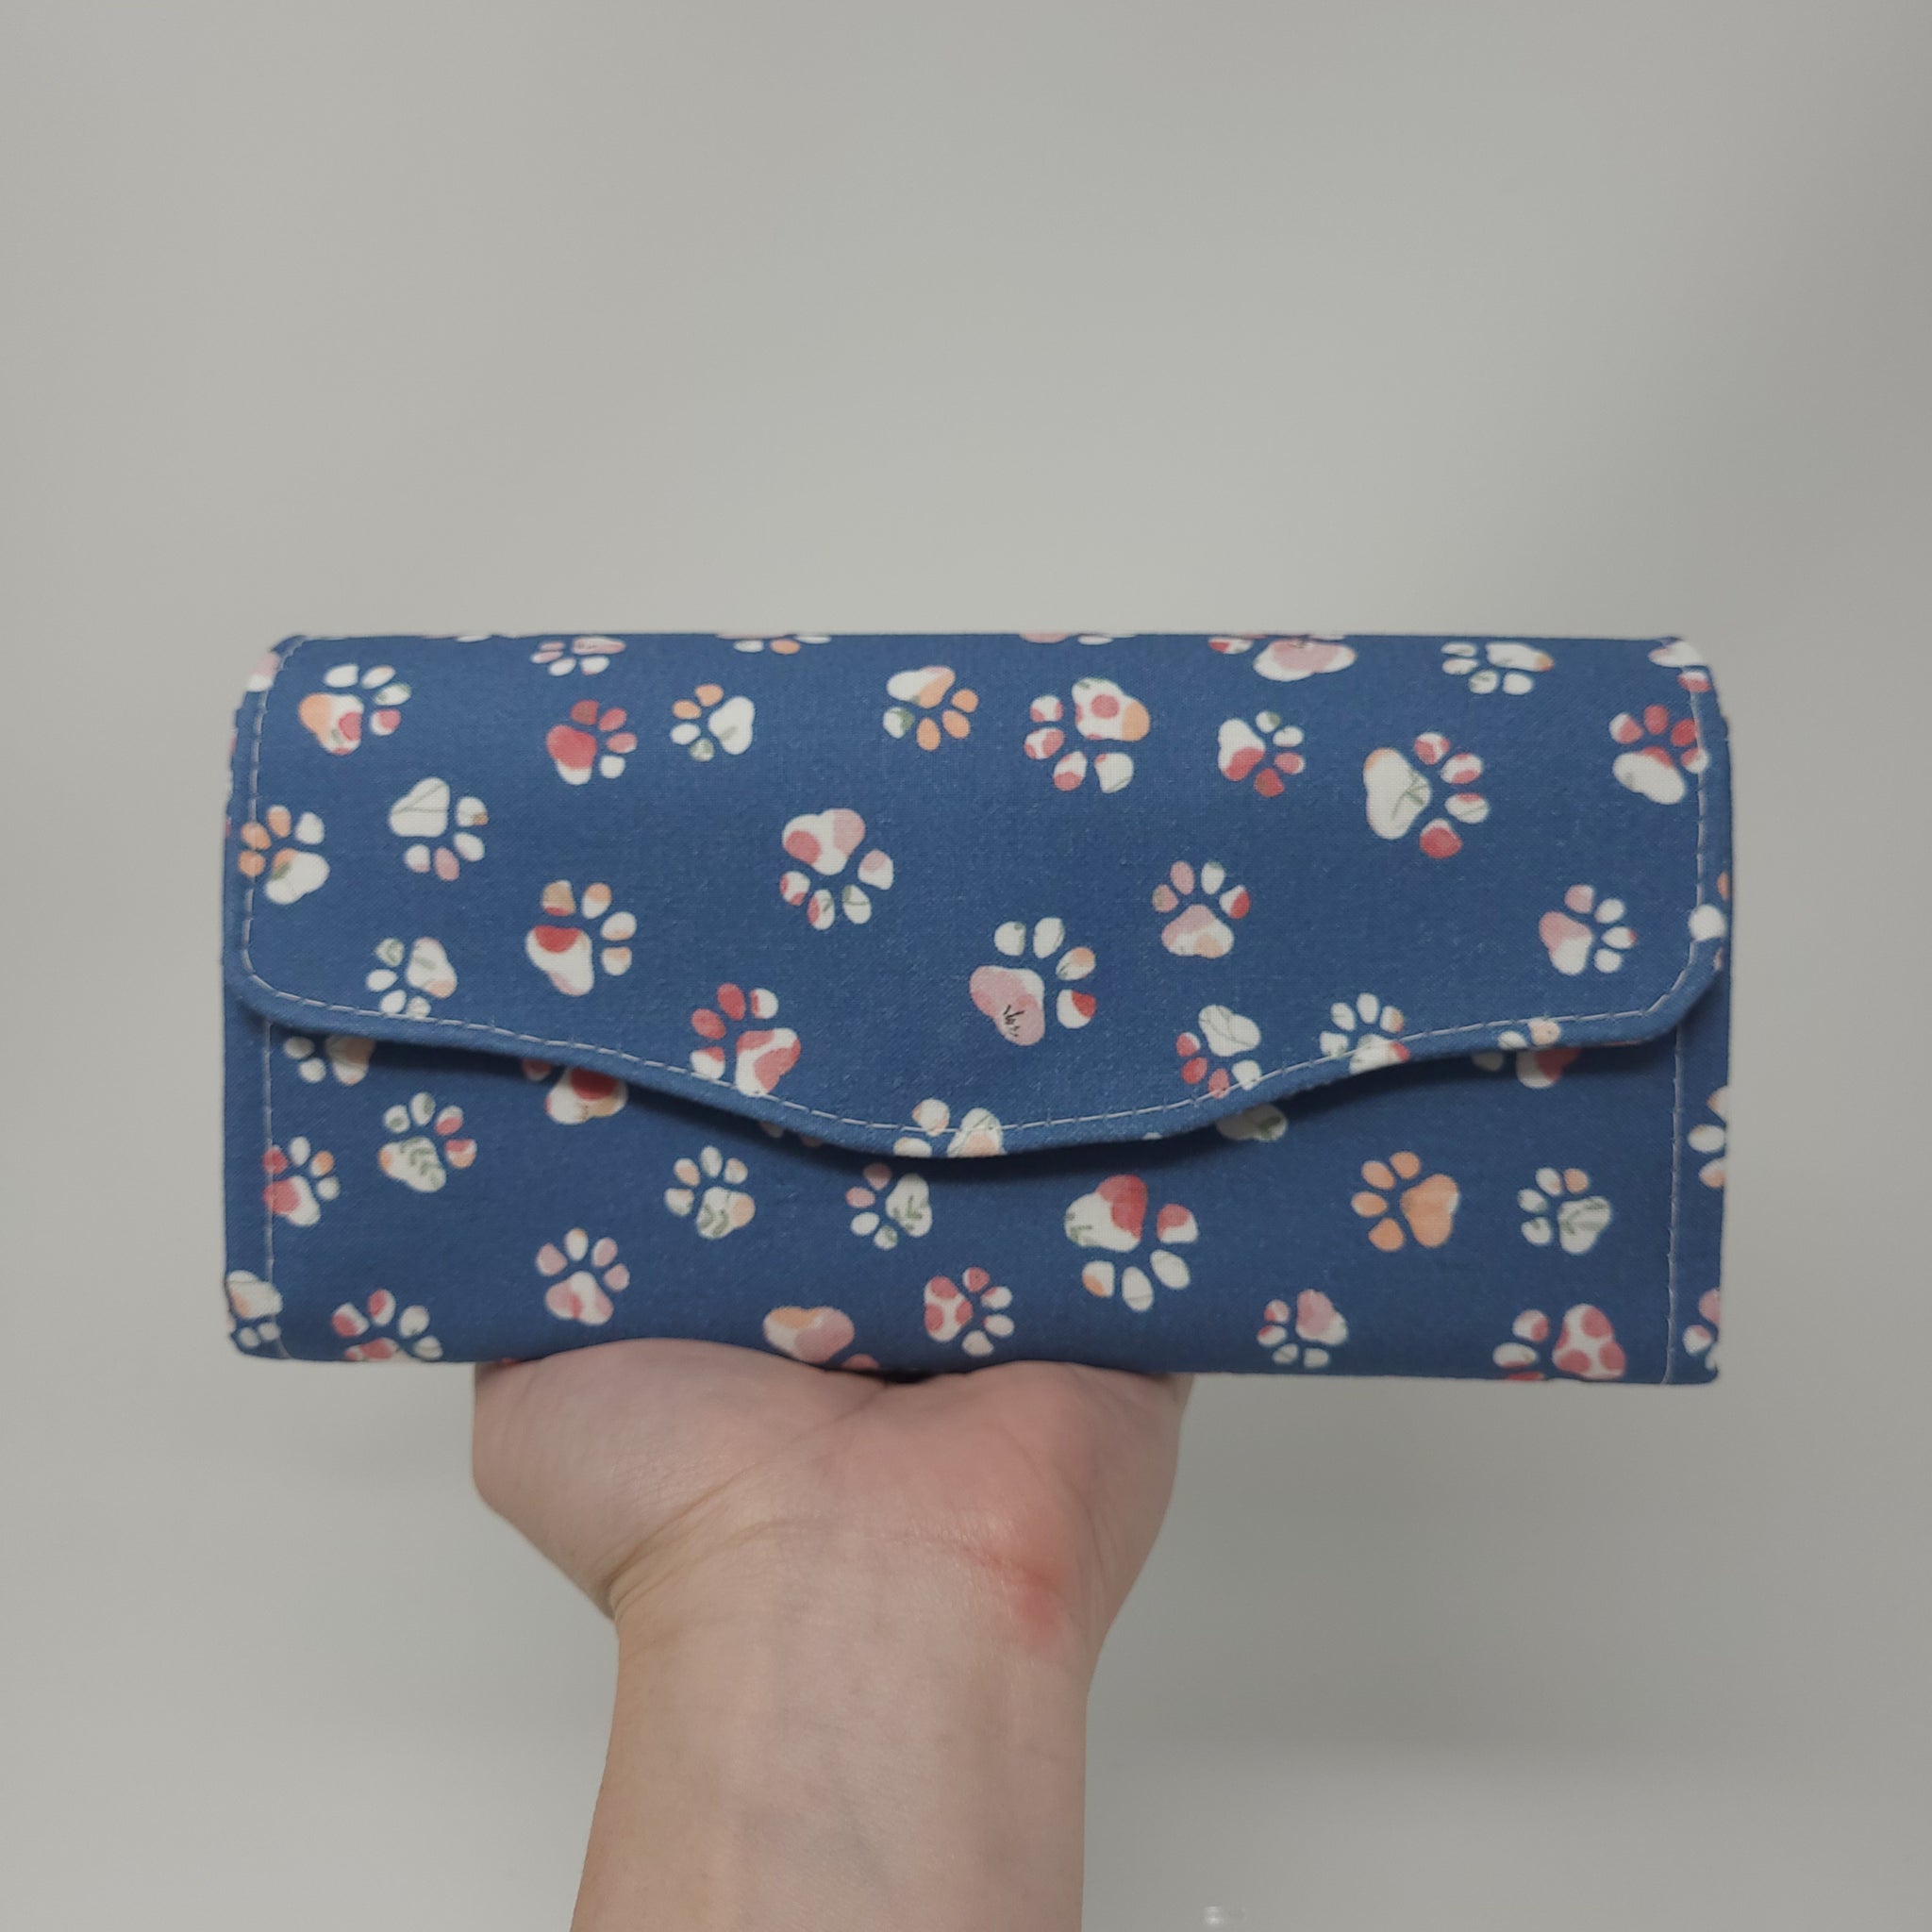 Necessary Clutch Wallet - Paw Please - Blue Floral Paw Prints